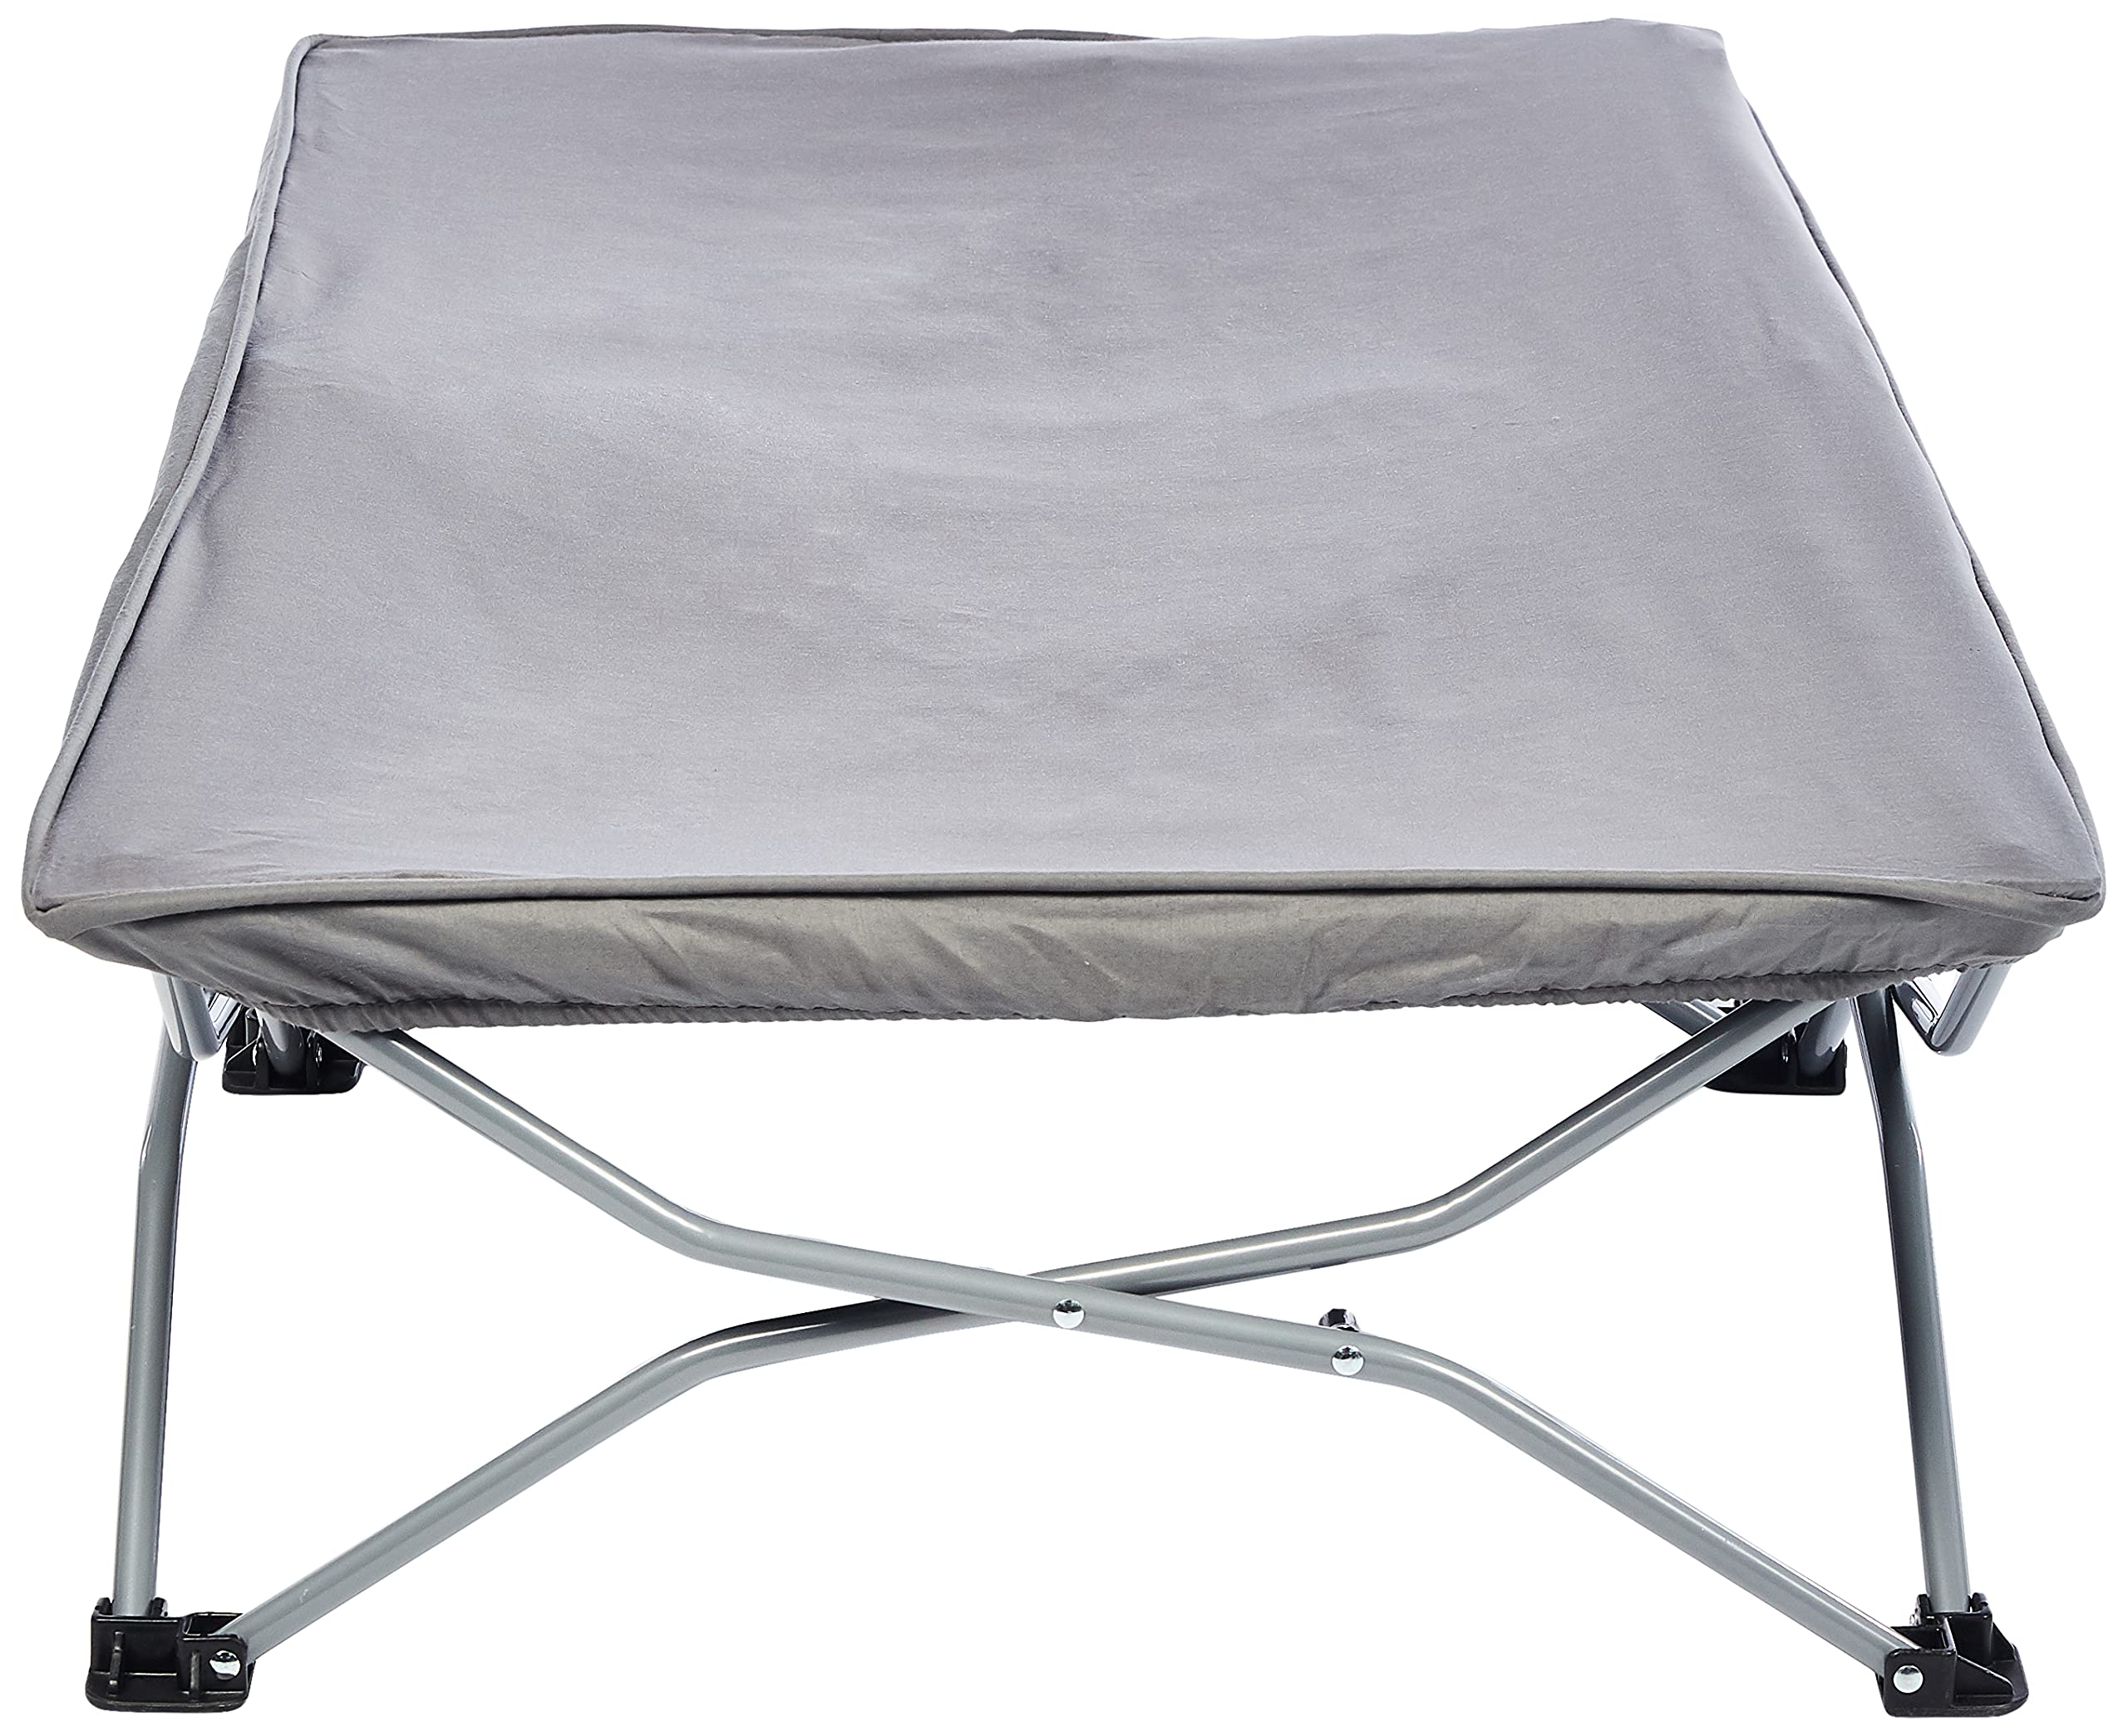 Regalo My Cot Portable Travel Bed, Includes Fitted Sheet, Grey, 1 Count (Pack of 1)